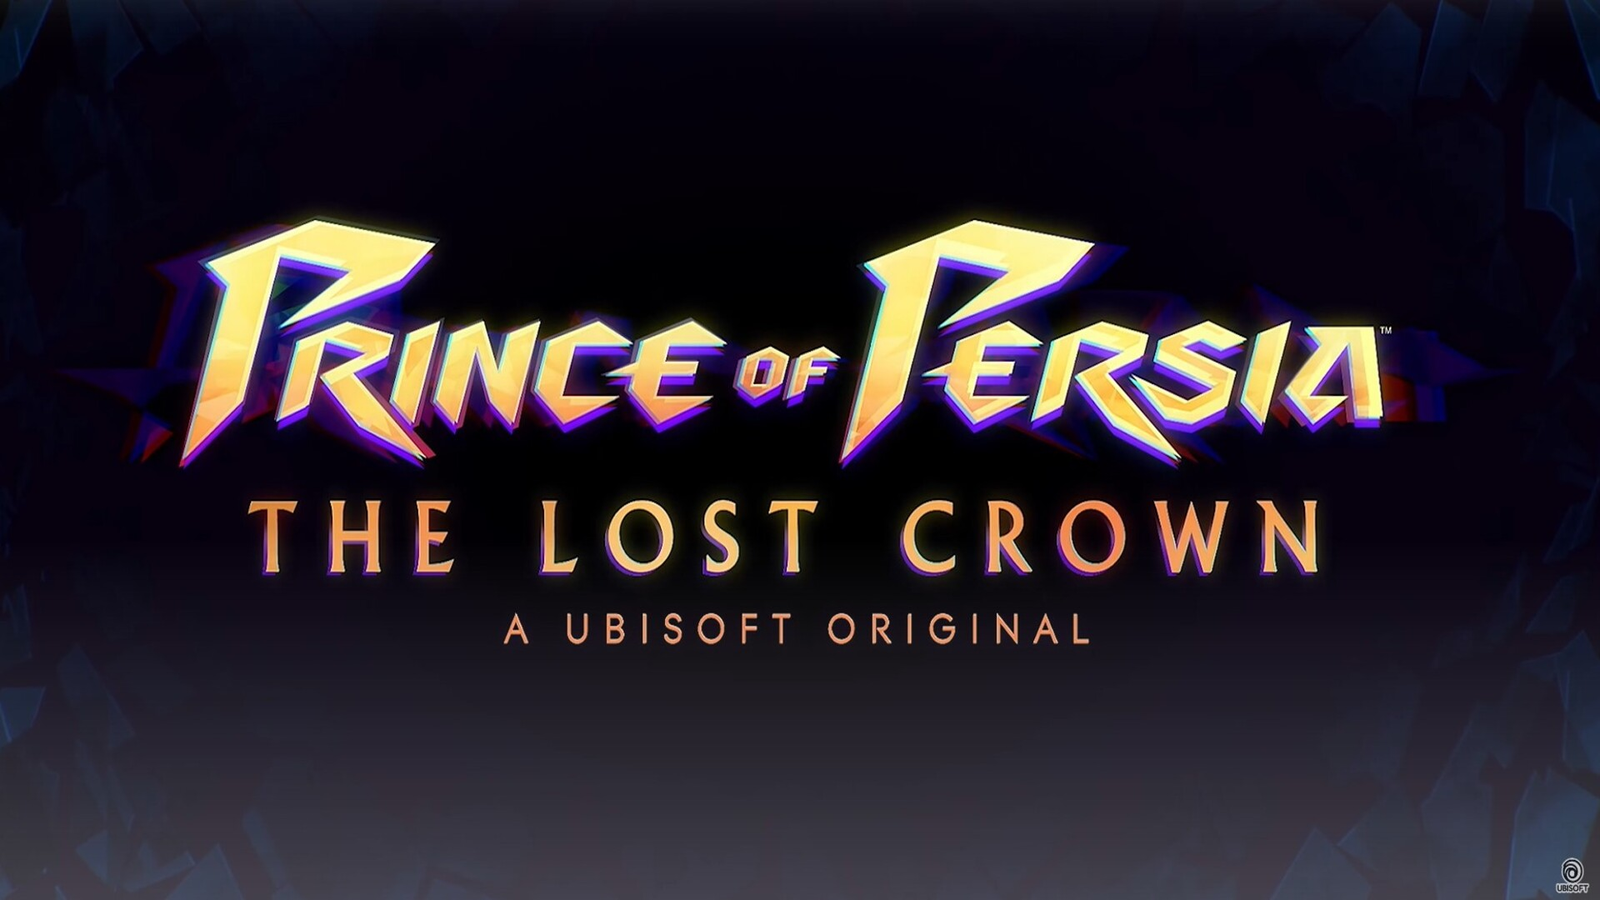 Prince of Persia: The Lost Crown kicked off Summer Game Fest 2023